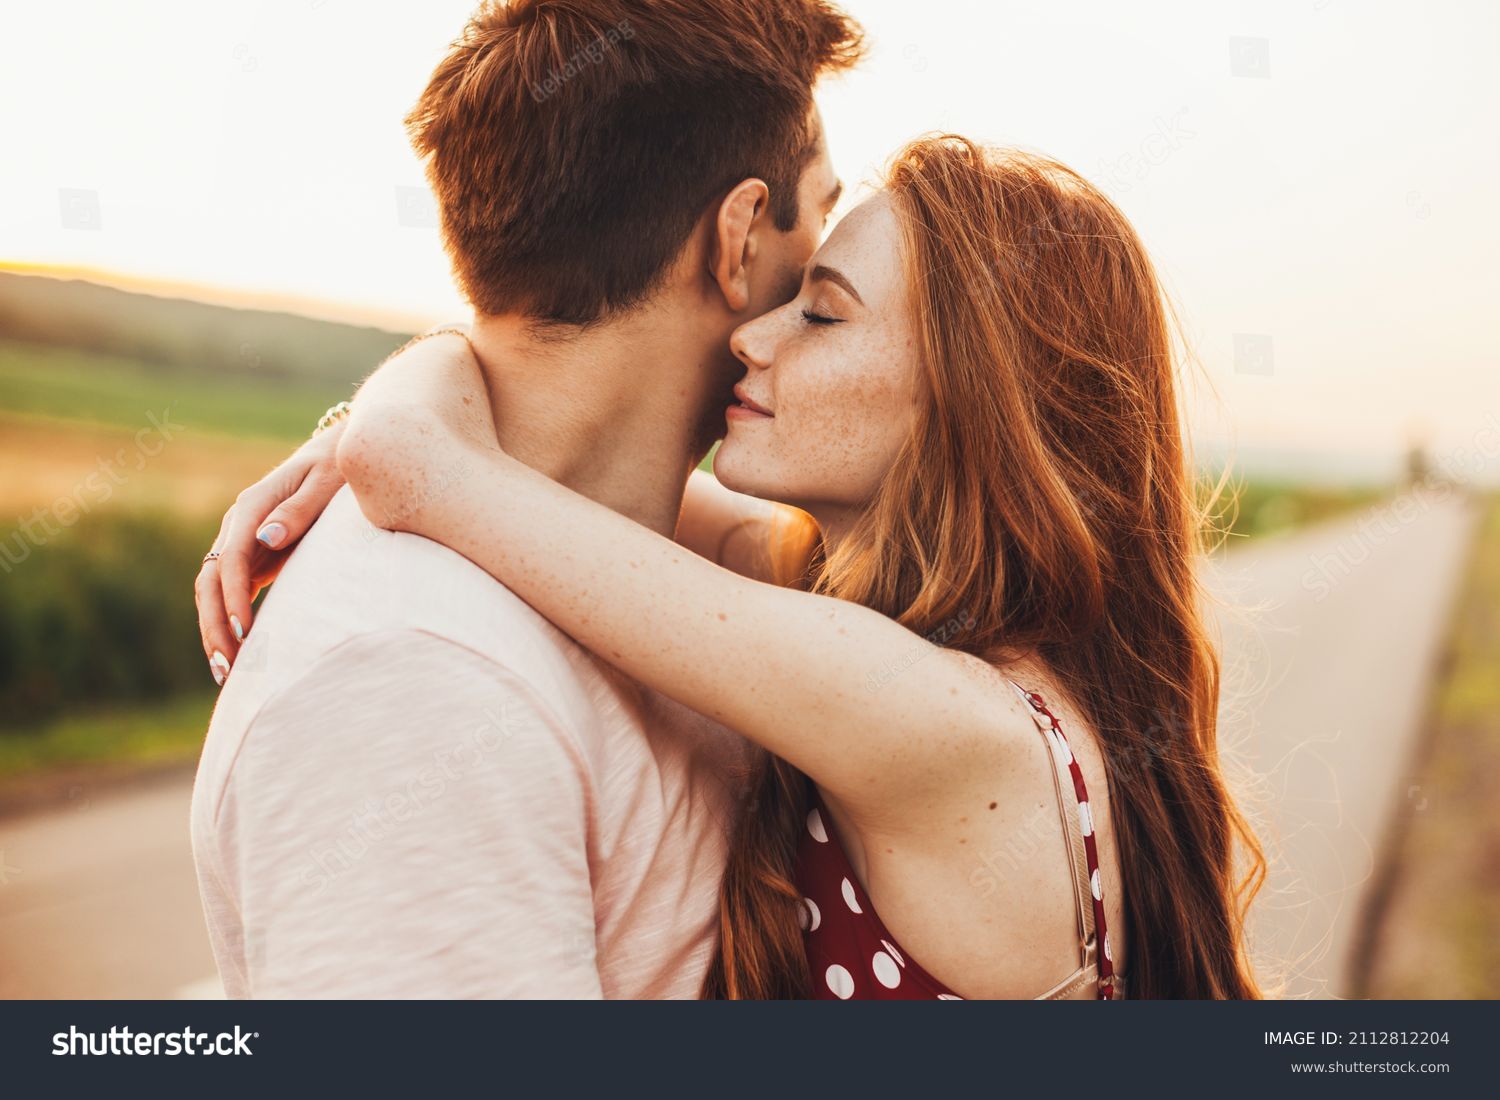 Close-up portrait of a caucasian young loving couple embracing while standing on a roadside. Couple embracing road travel. Sunset scene. #2112812204